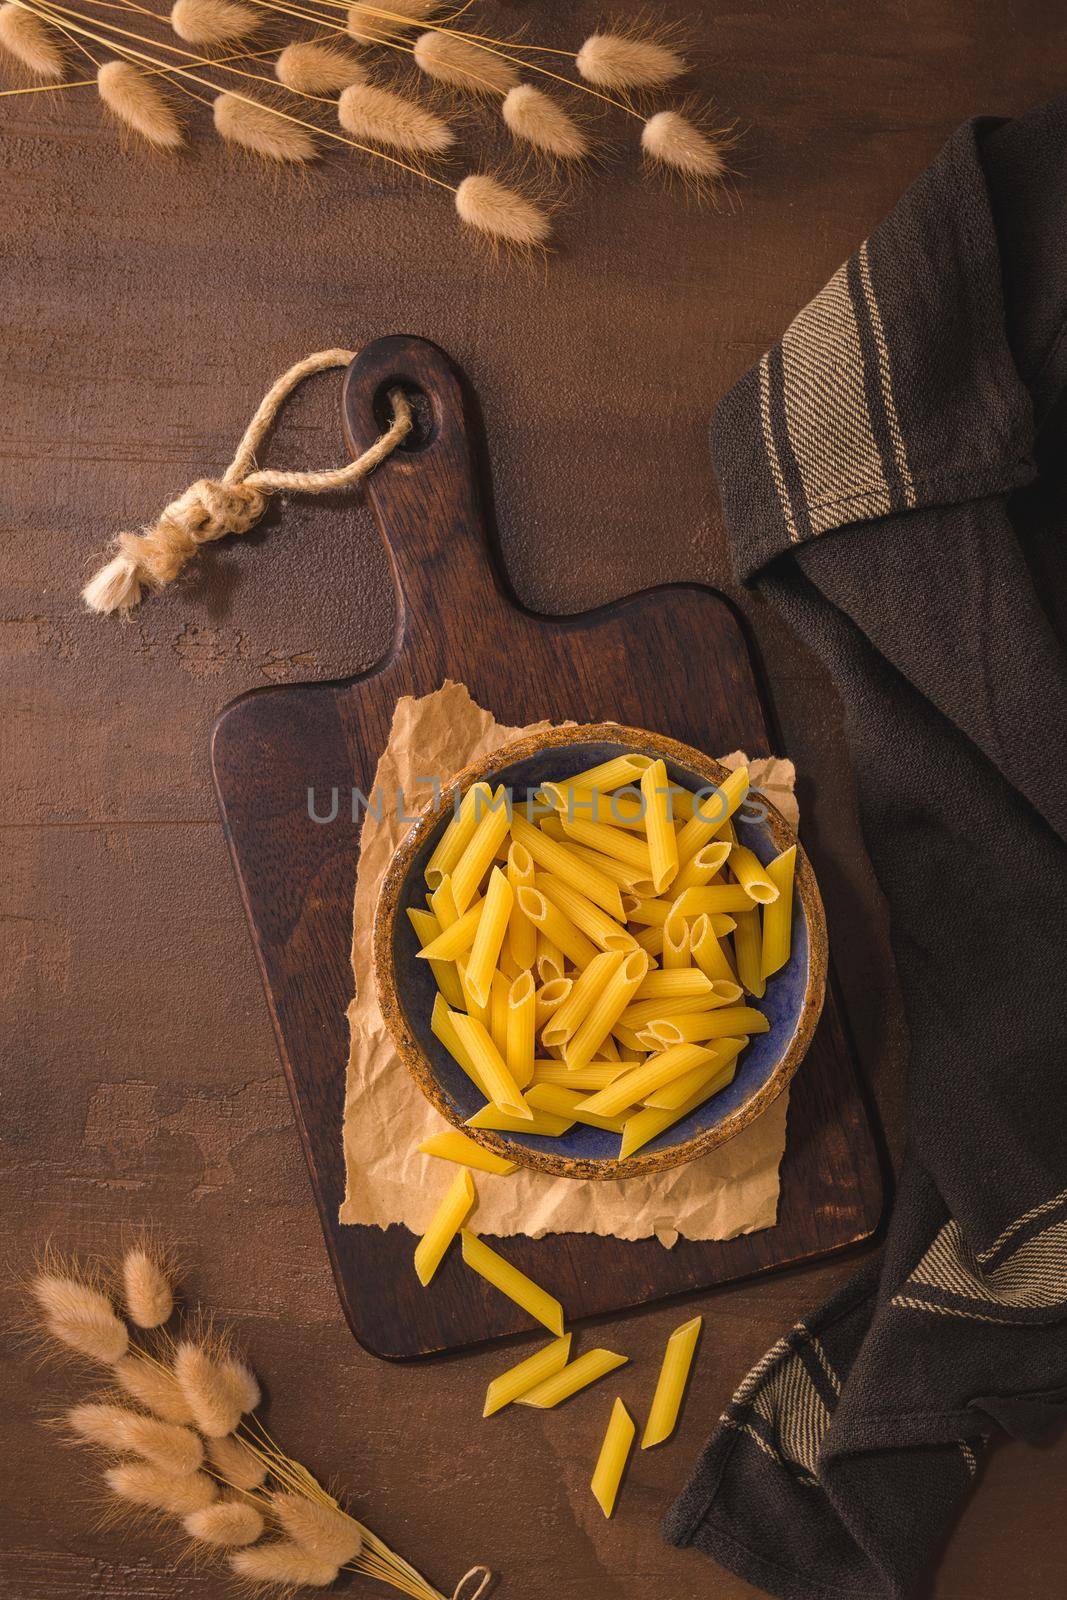 Penne pasta in wooden cutting board on rustic kitchen countertop.